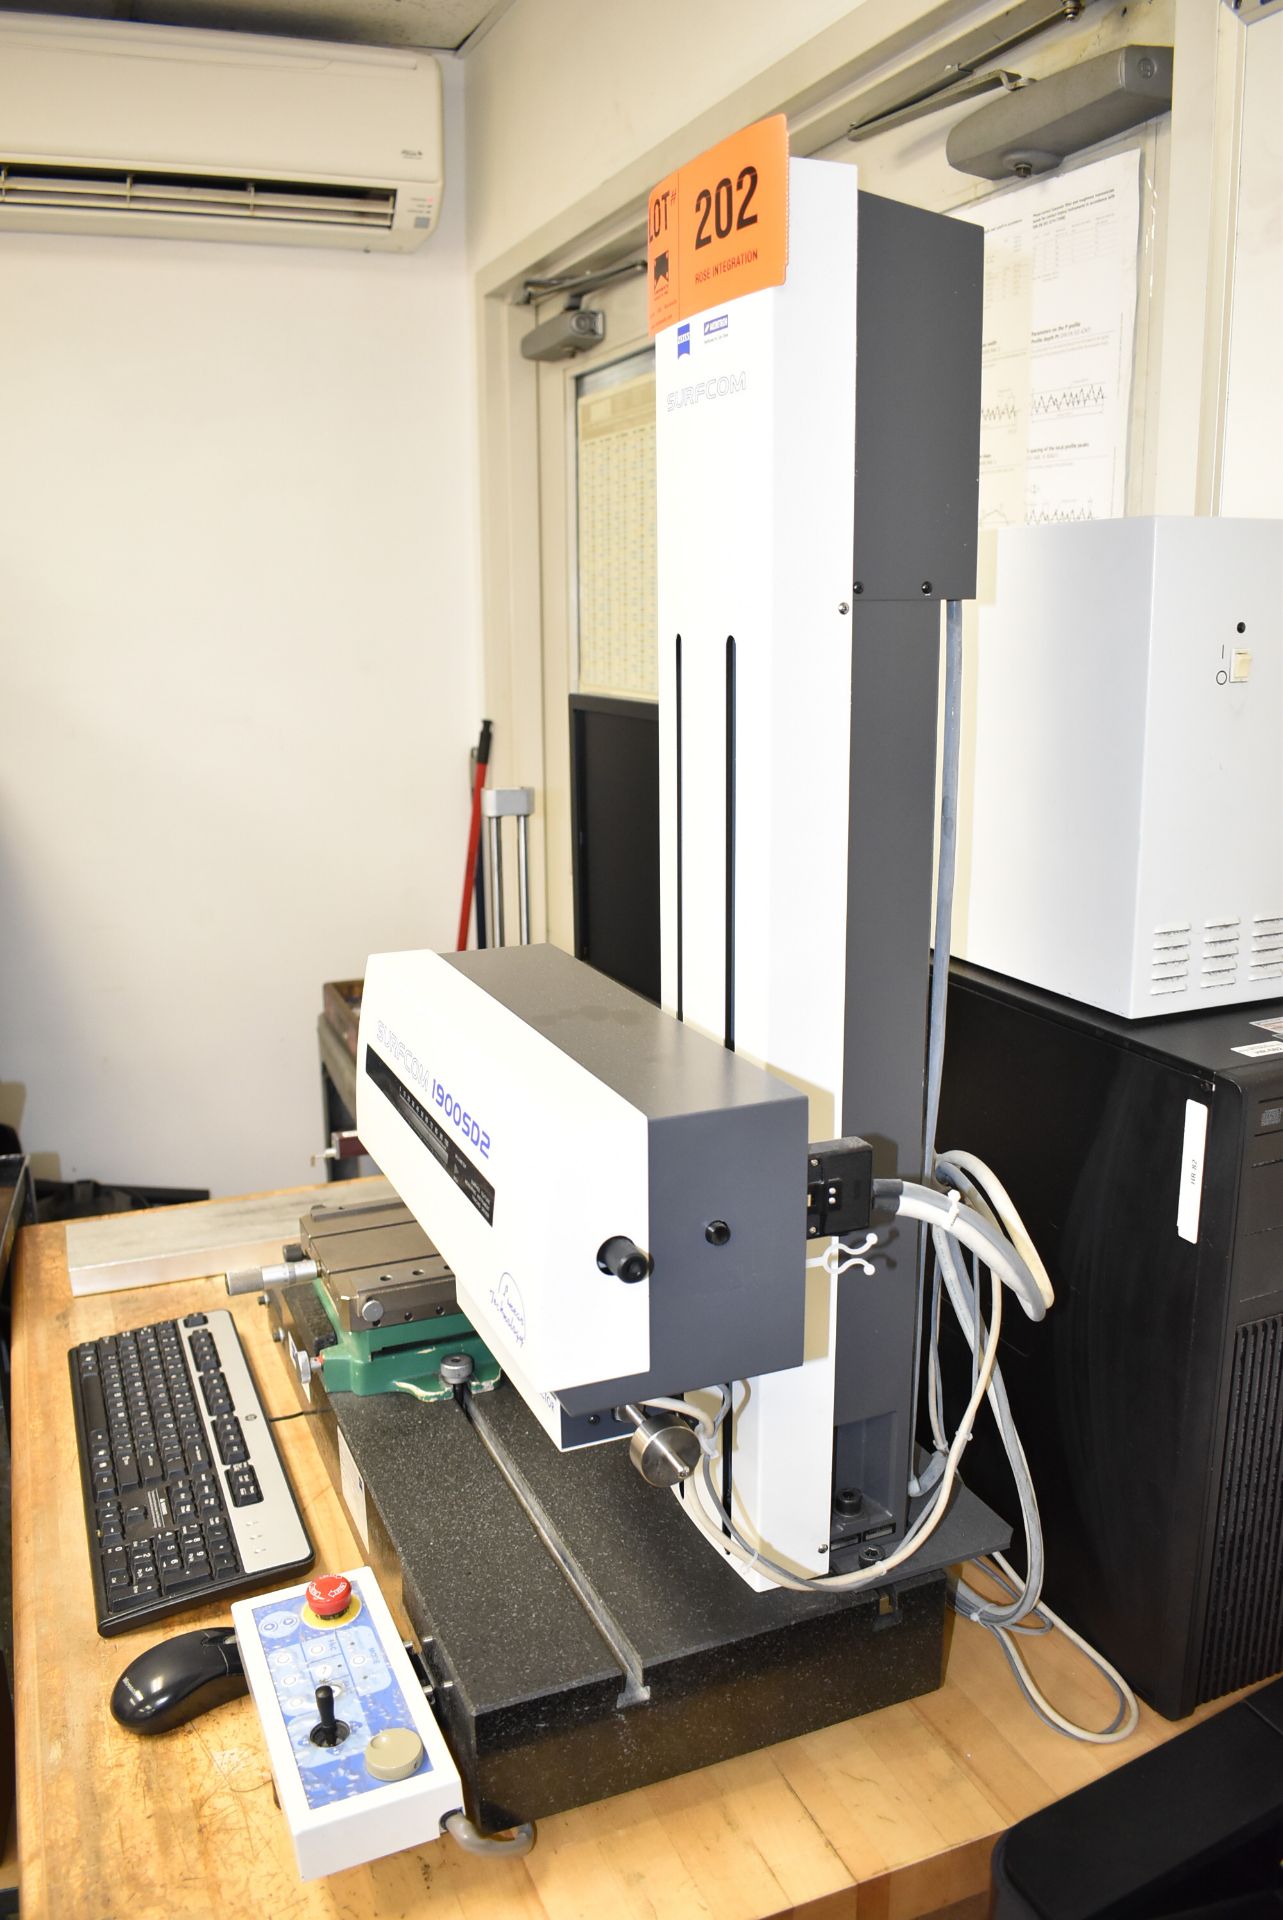 ZEISS SURFCOM 1900SD2 CNC CONTOUR AND SURFACE MEASURING SYSTEM WITH WINDOWS PC BASED CONTROL AND - Image 8 of 8